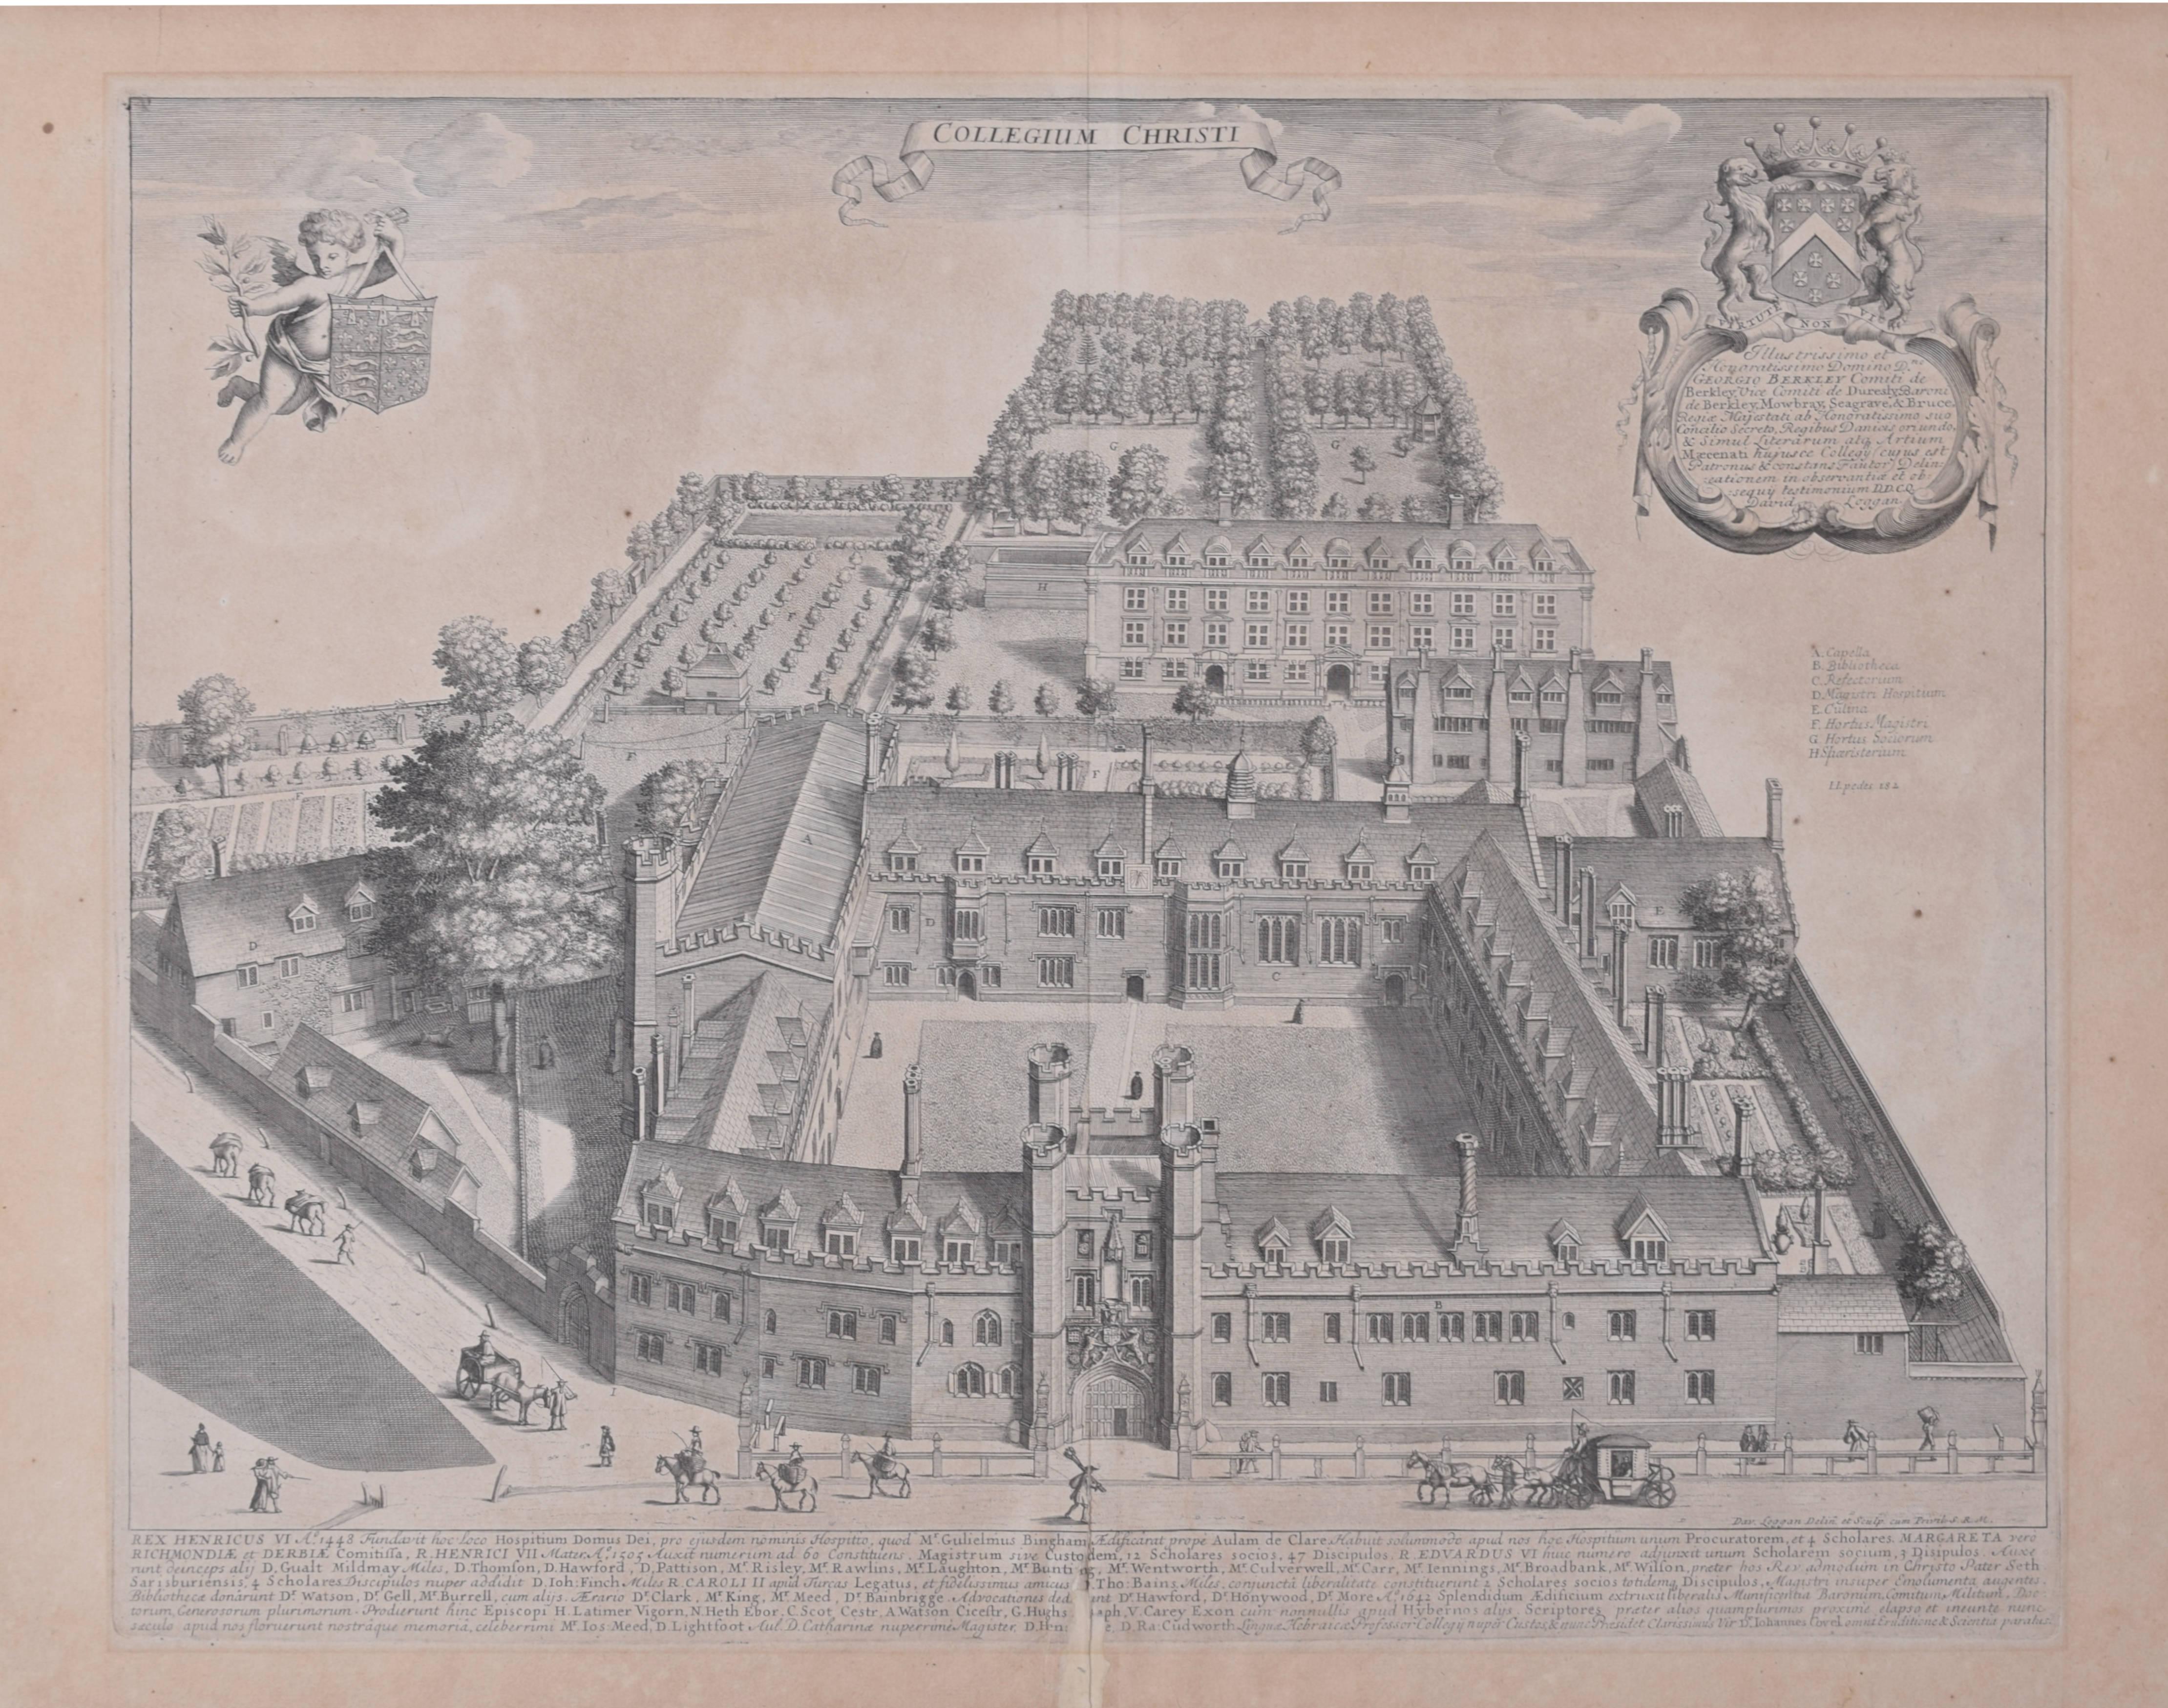 To see our other views of Oxford and Cambridge, scroll down to "More from this Seller" and below it click on "See all from this seller" - or send us a message if you cannot find the view you want.

David Loggan (1634 - 1692)
Christ's College,